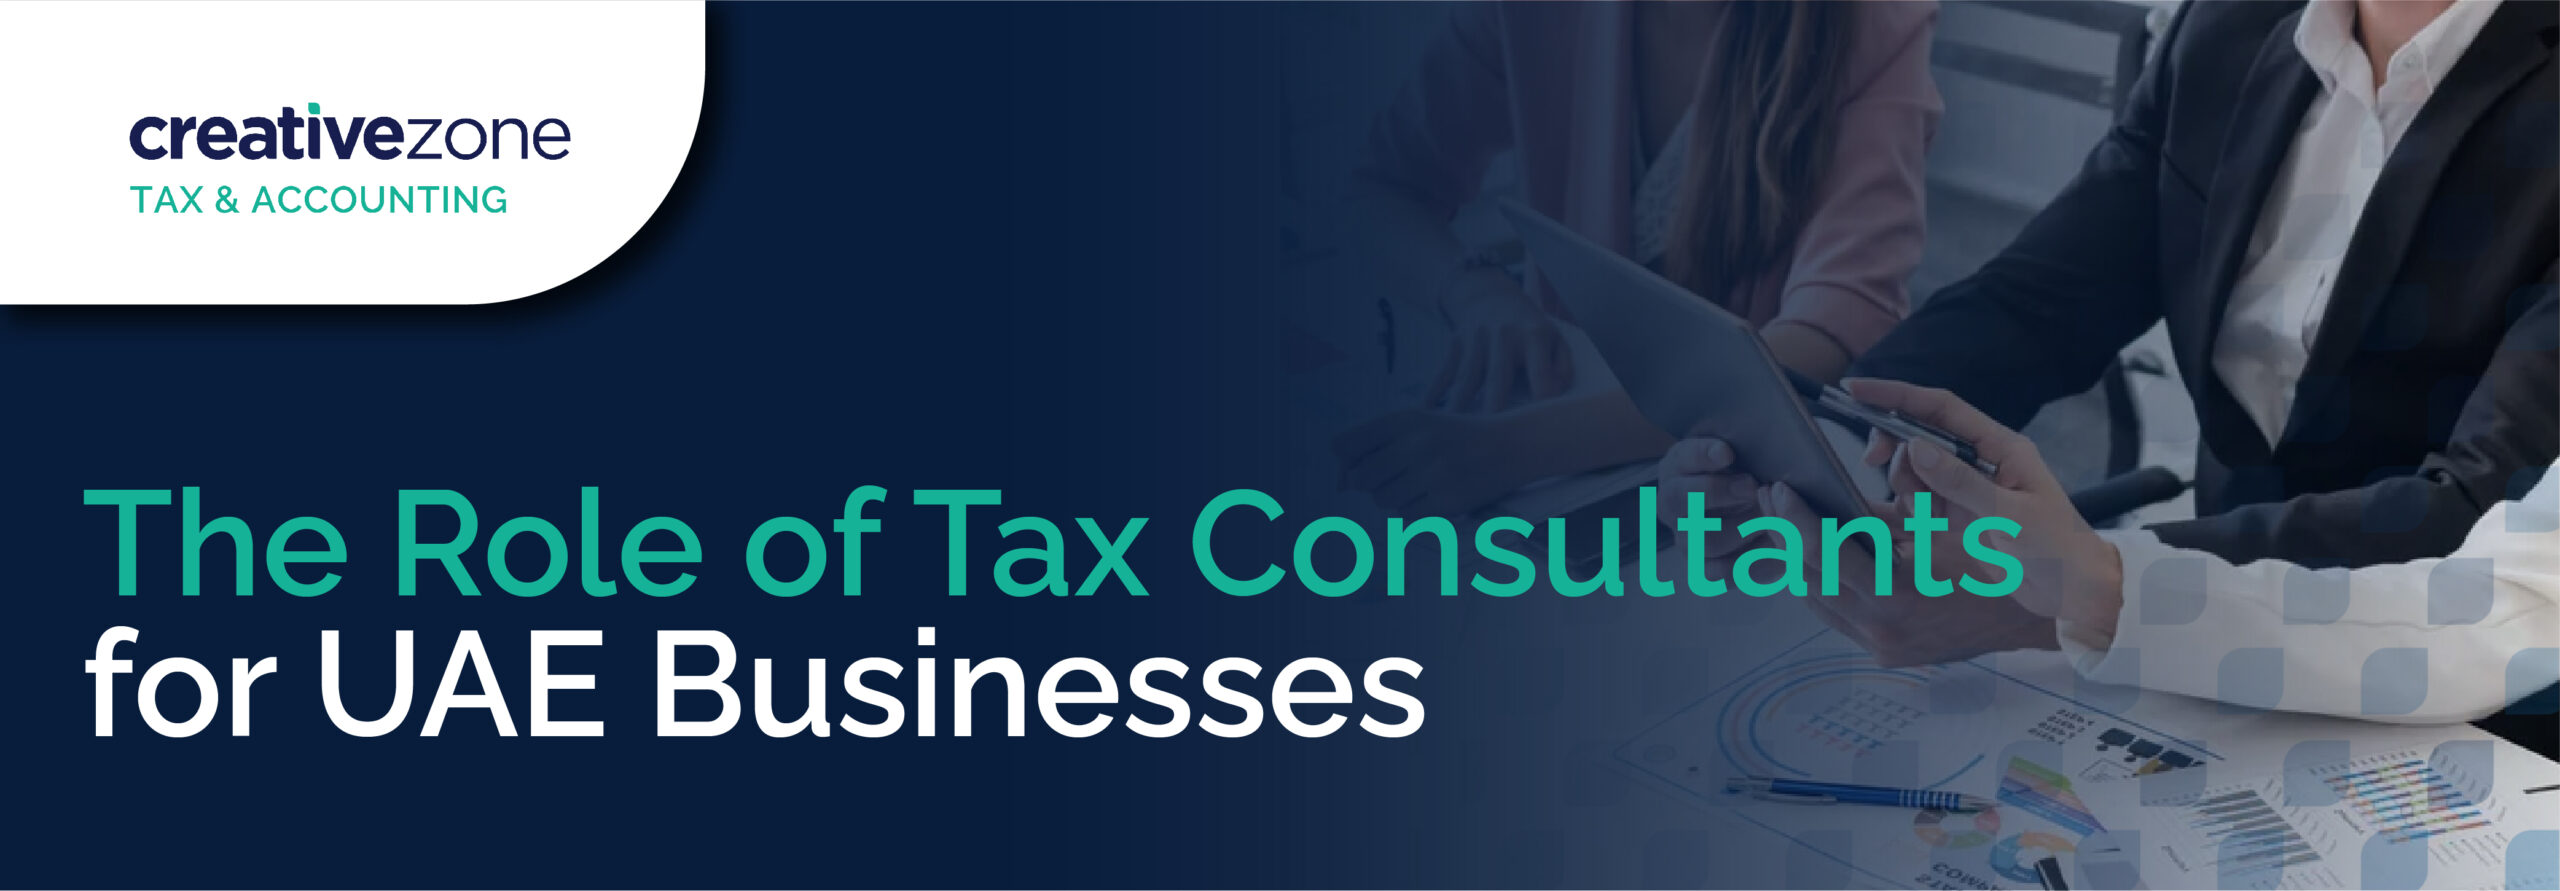 The Role of Tax Consultants for UAE Businesses